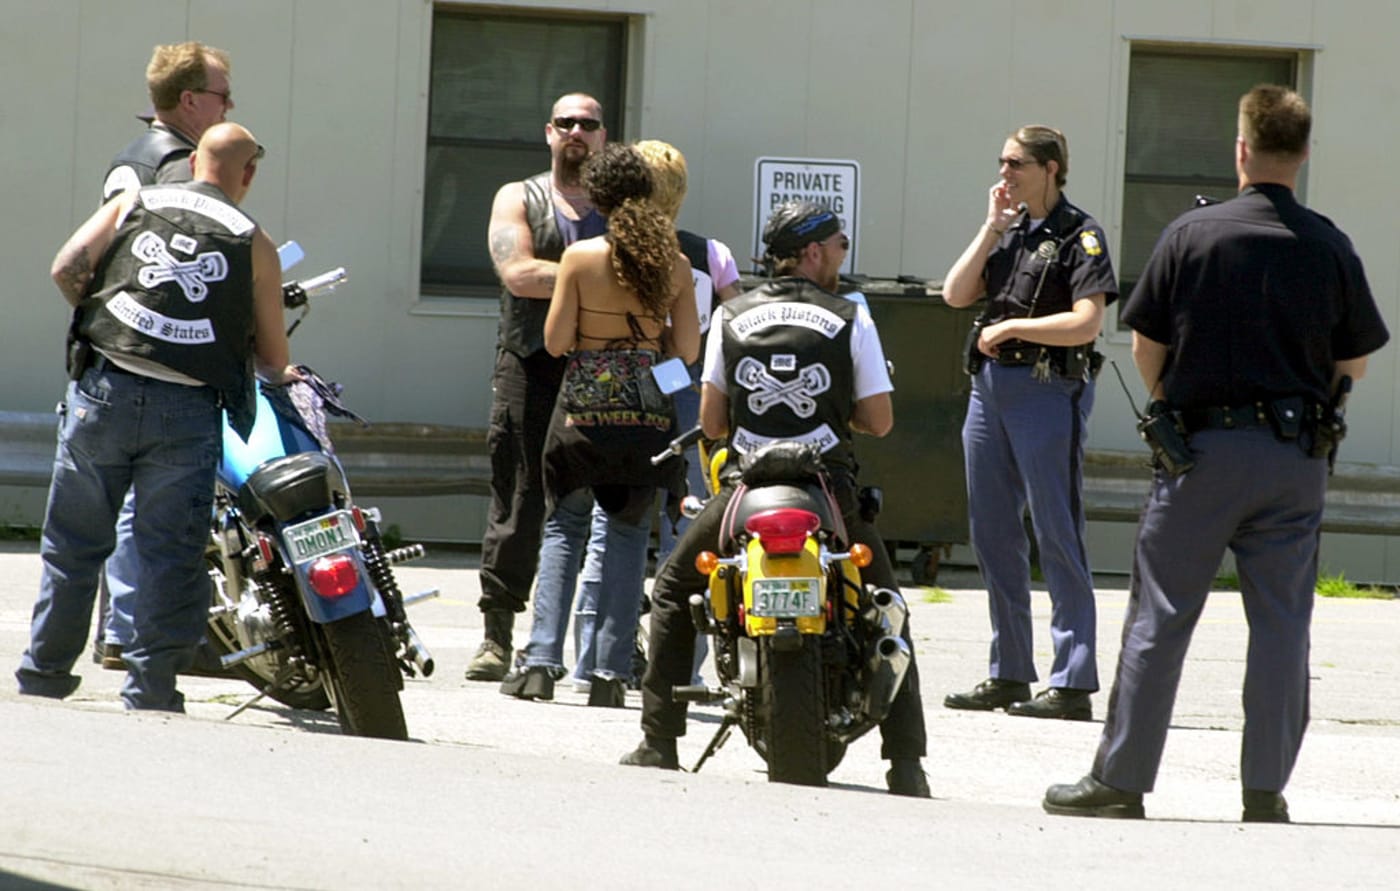 The Most Dangerous Motorcycle Clubs In The World - Bank2home.com